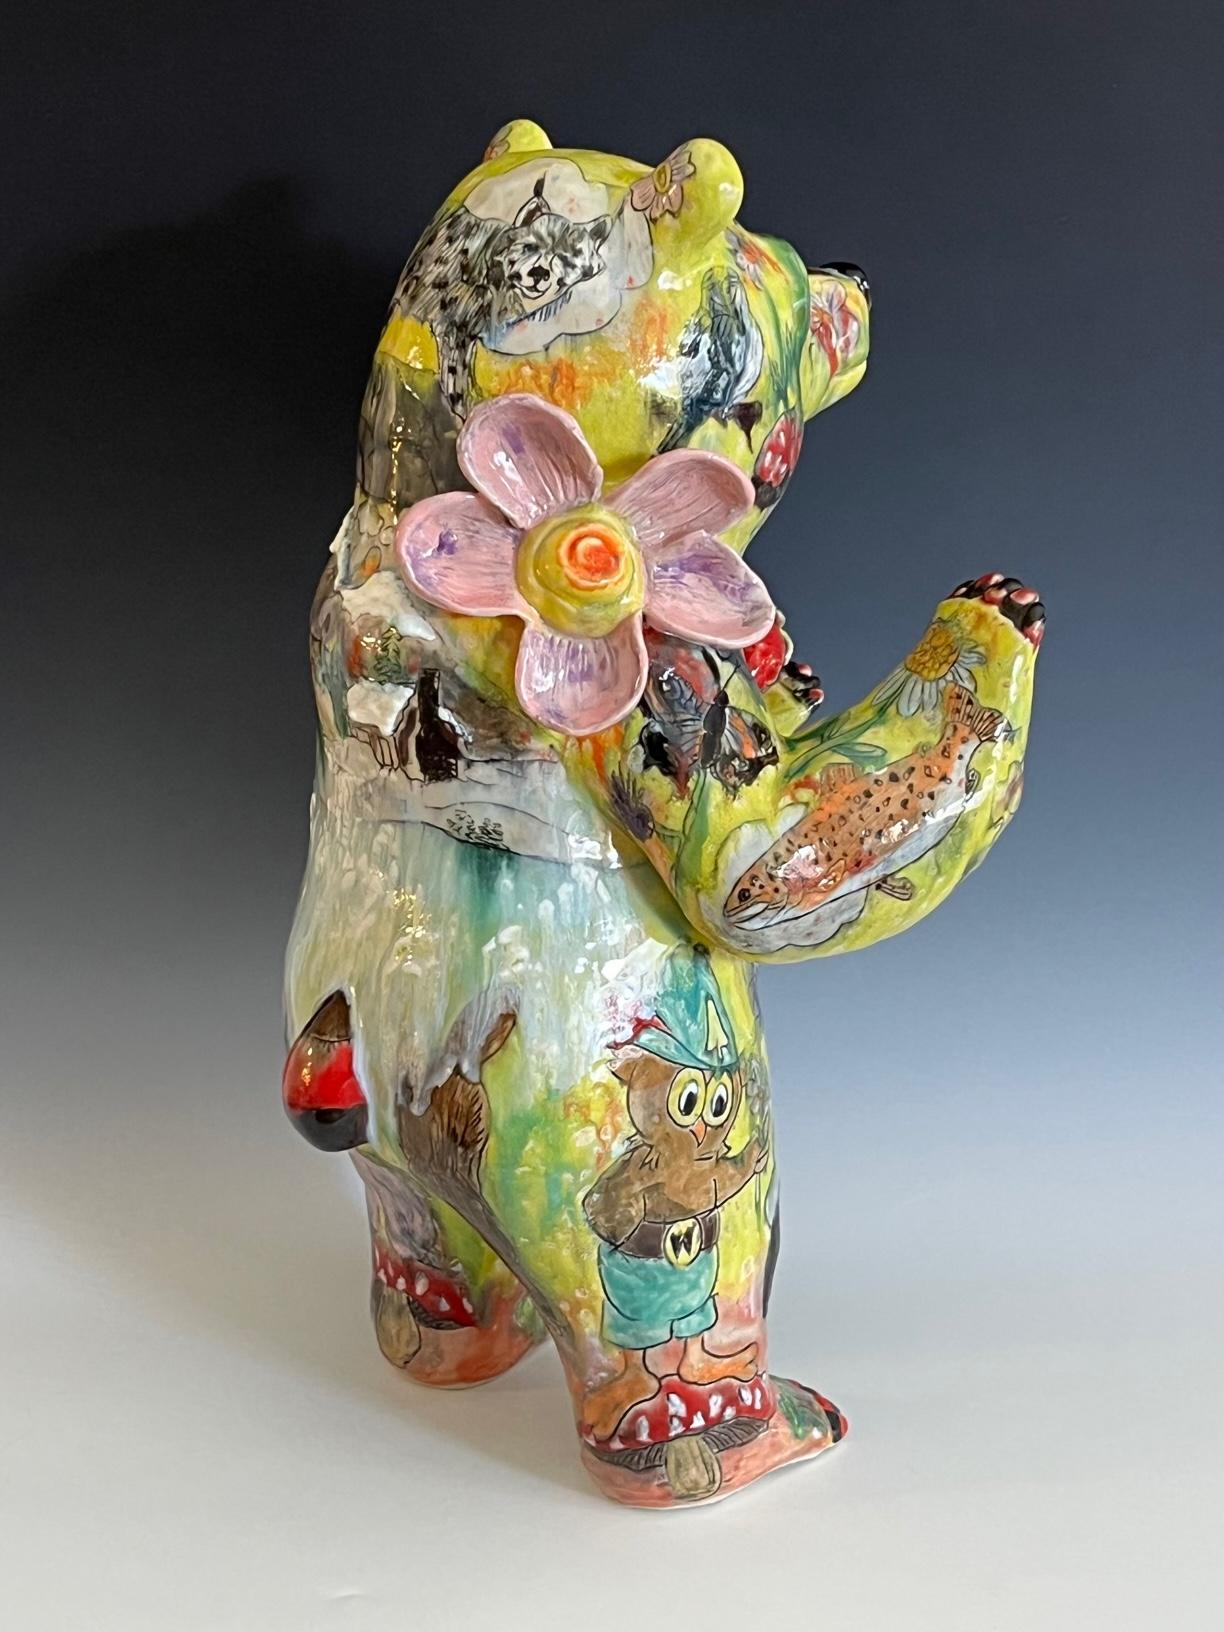 Yellow Bear - Contemporary Sculpture by Molly Schulps